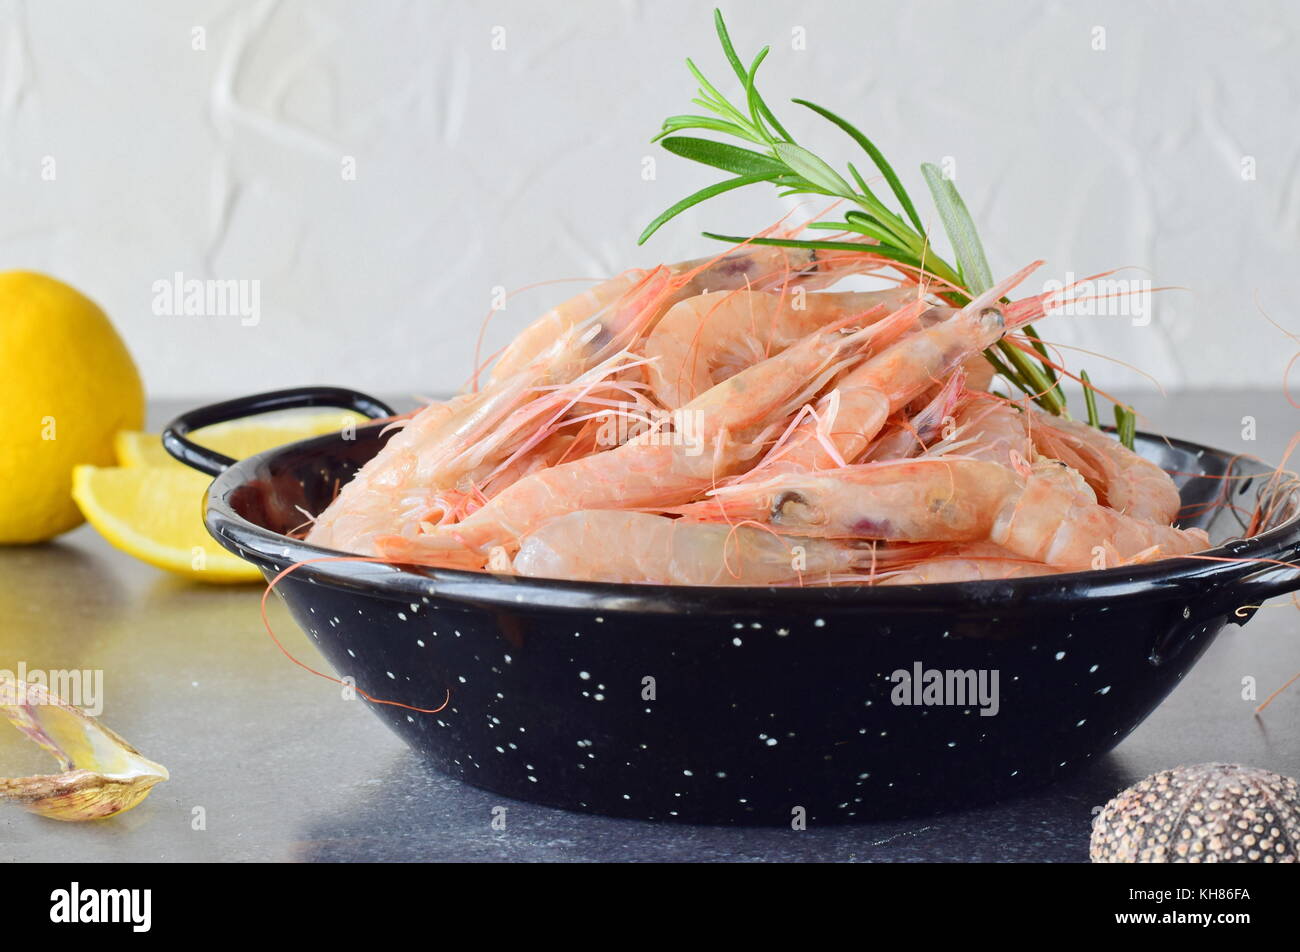 Raw fresh shrimps in a black metal bowl with rosemary on a grey background. Mediterranean lifestyle. Healthy food Stock Photo